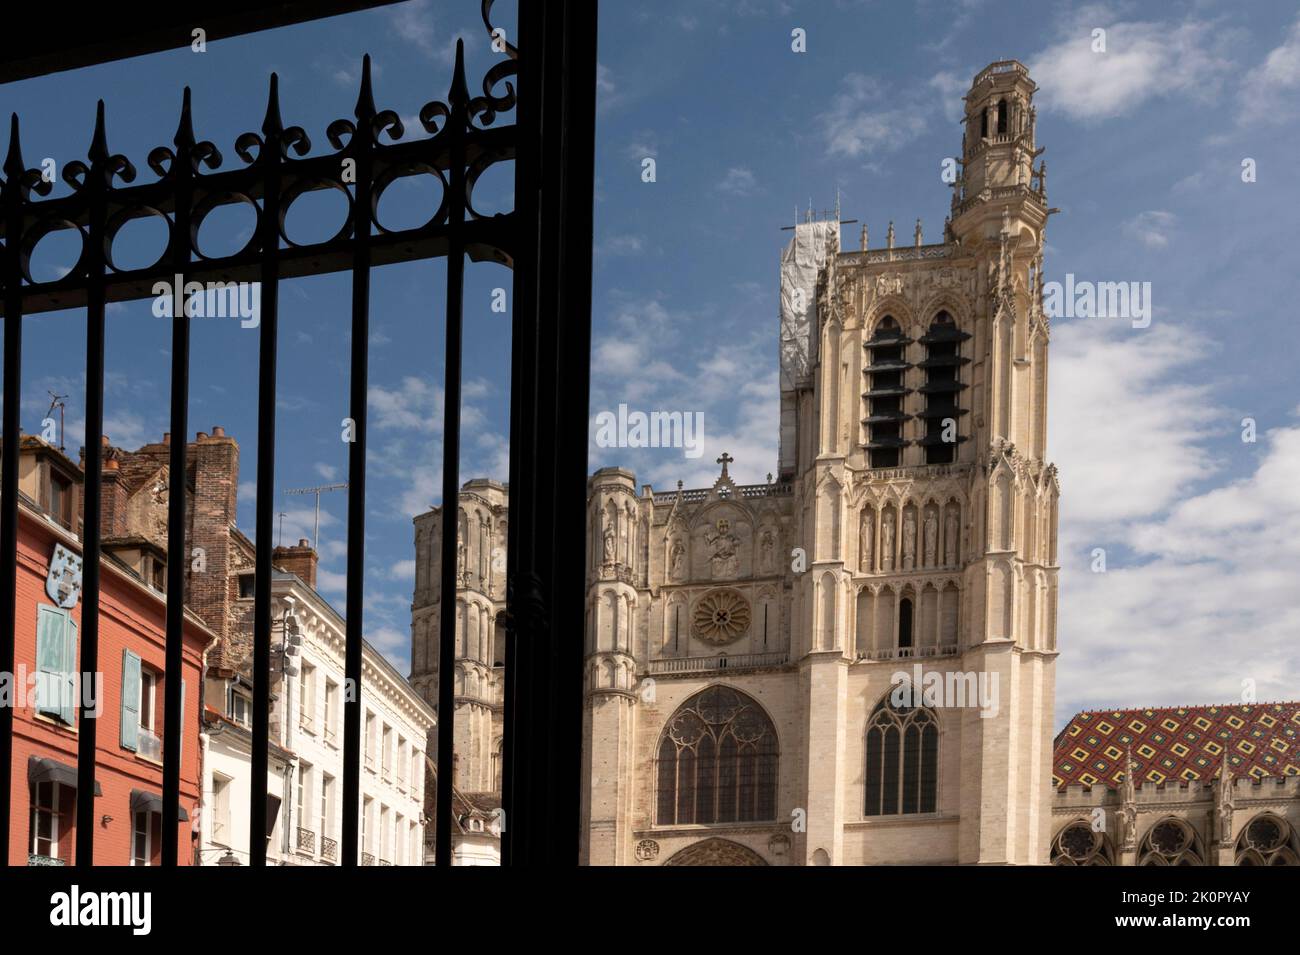 A view of the cathedral from the indoor market of Sens, Burgundy, France Stock Photo